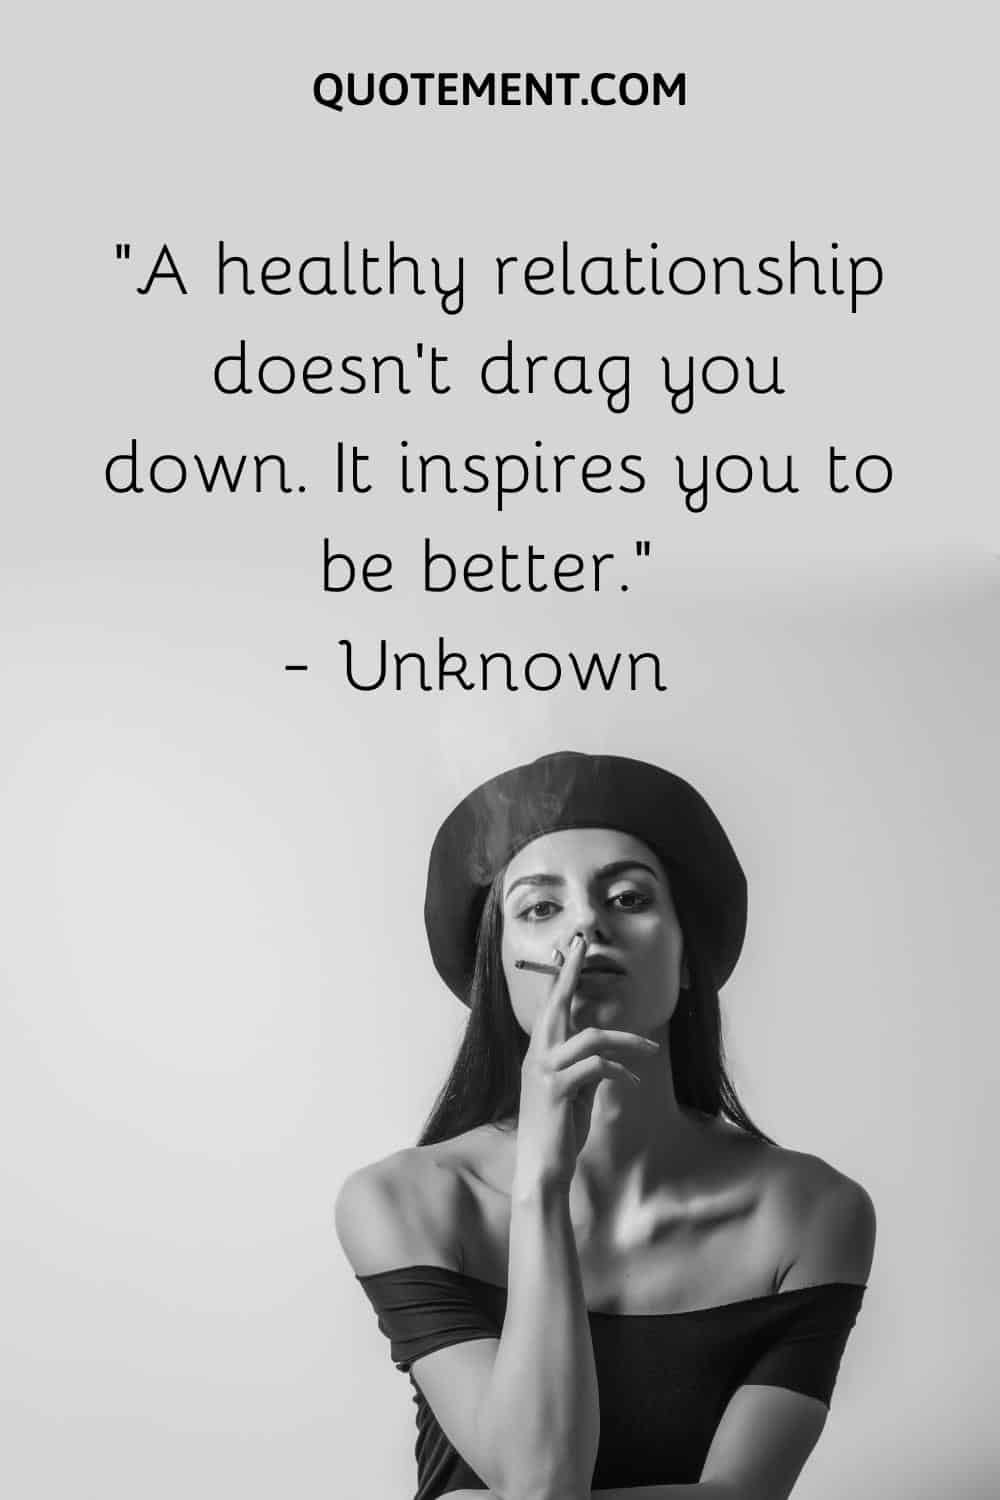 A healthy relationship doesn’t drag you down